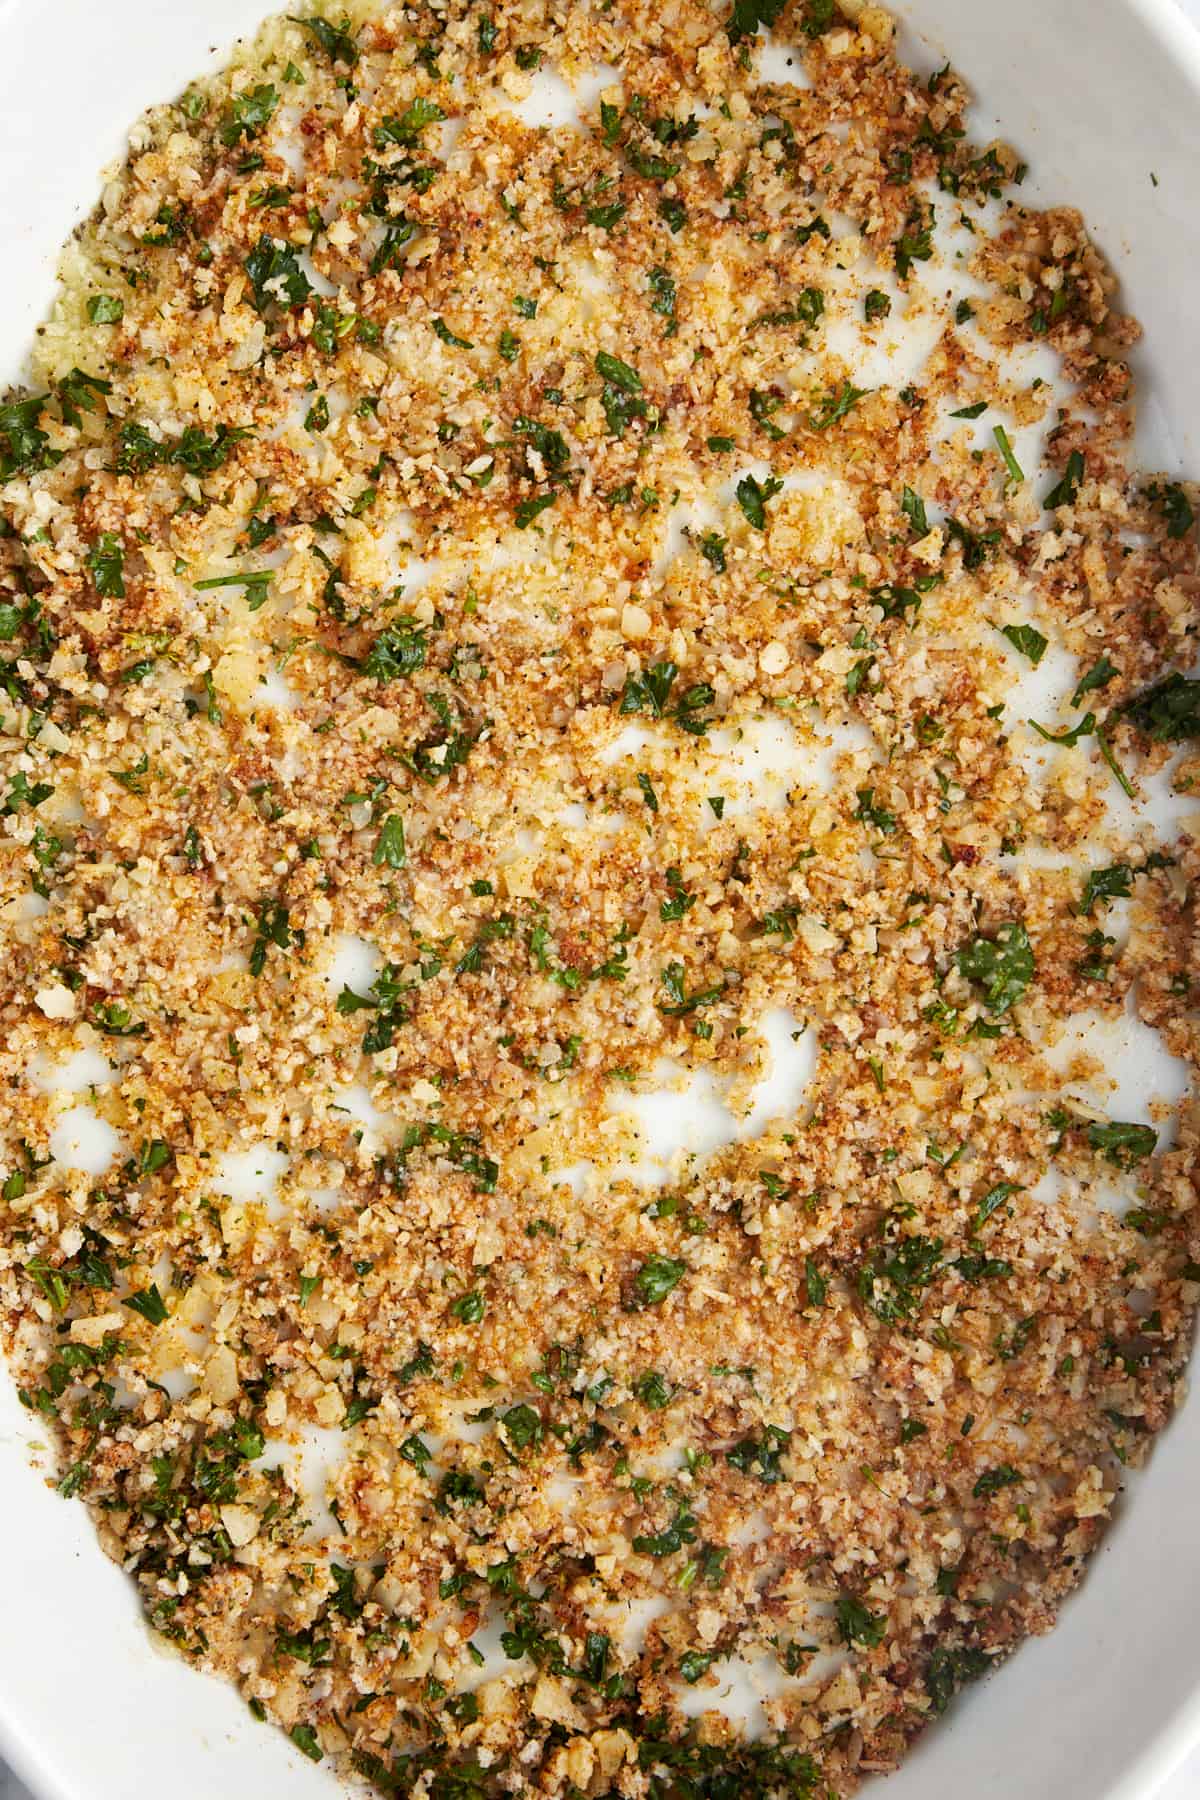 Breadcrumbs, butter, herbs, and spices in a 9x13 baking dish. 